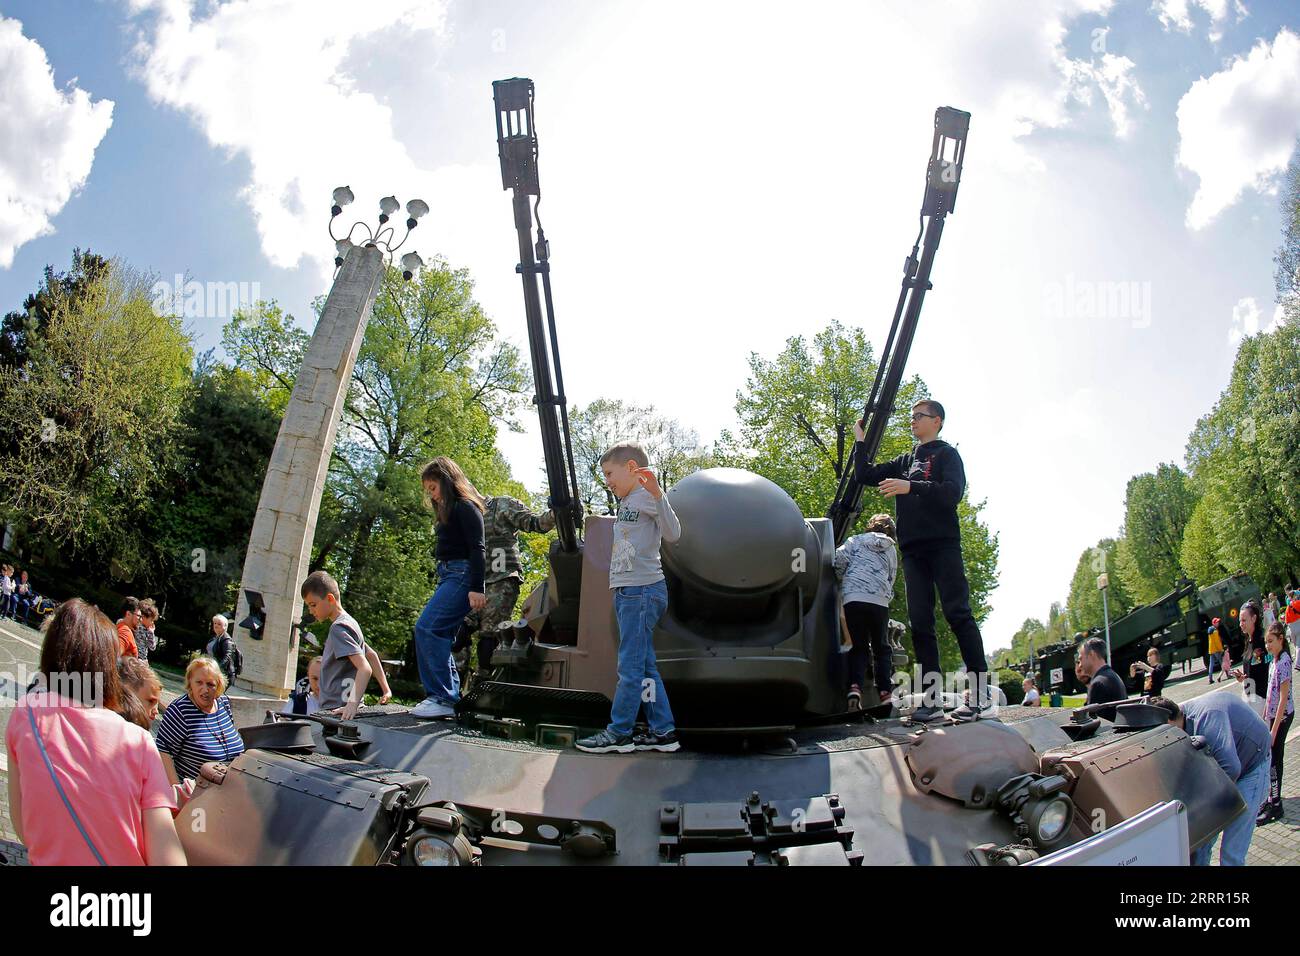 230424 -- BUCHAREST, April 24, 2023 -- Children have fun on an armoured vehicle at a static exhibition of military equipment marking Romanian Land Forces Day at a park in Bucharest, capital of Romania, April 23, 2023. Photo by /Xinhua ROMANIA-BUCHAREST-LAND FORCES DAY-EXHIBITION CristianxCristel PUBLICATIONxNOTxINxCHN Stock Photo